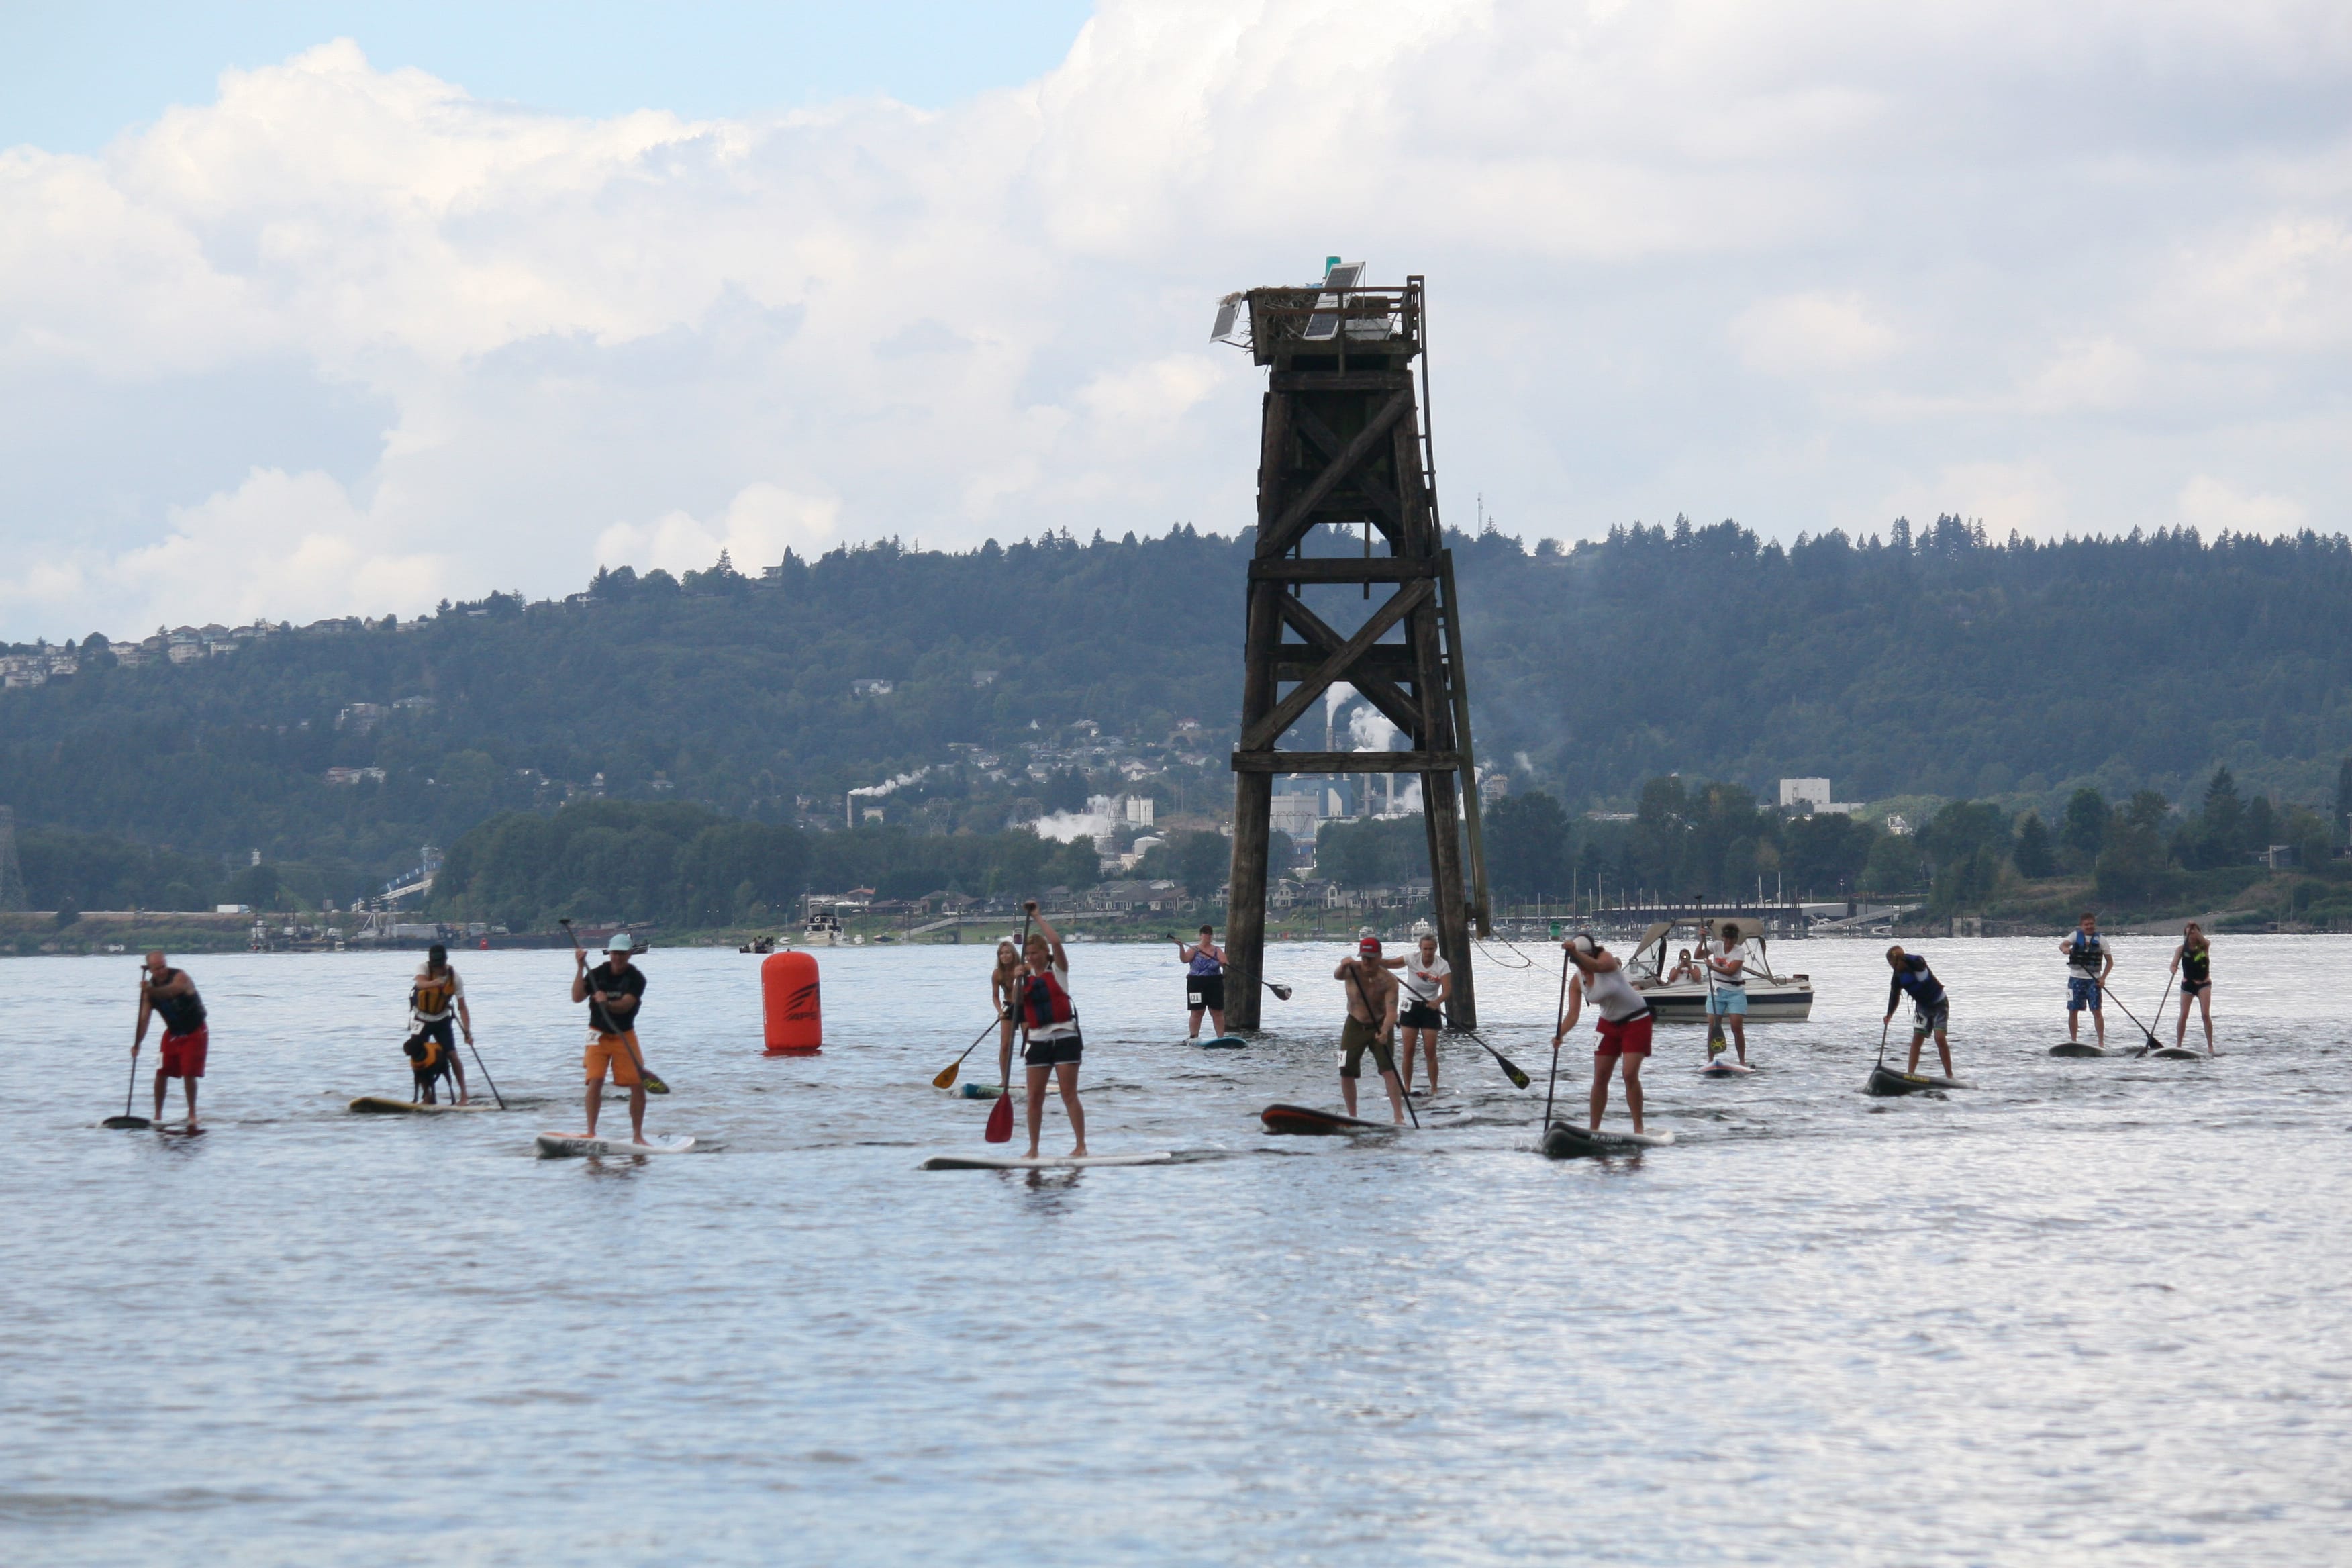 Paddleboarders from all walks of life arrived in Washougal for the first SUP Salmon Classic Sunday, at Capt. William Clark Park. The 8-mile long course challenge featured more than 30 competitors from all around the world. The 4-mile short course and the 2-mile novice race each had 15 participants.